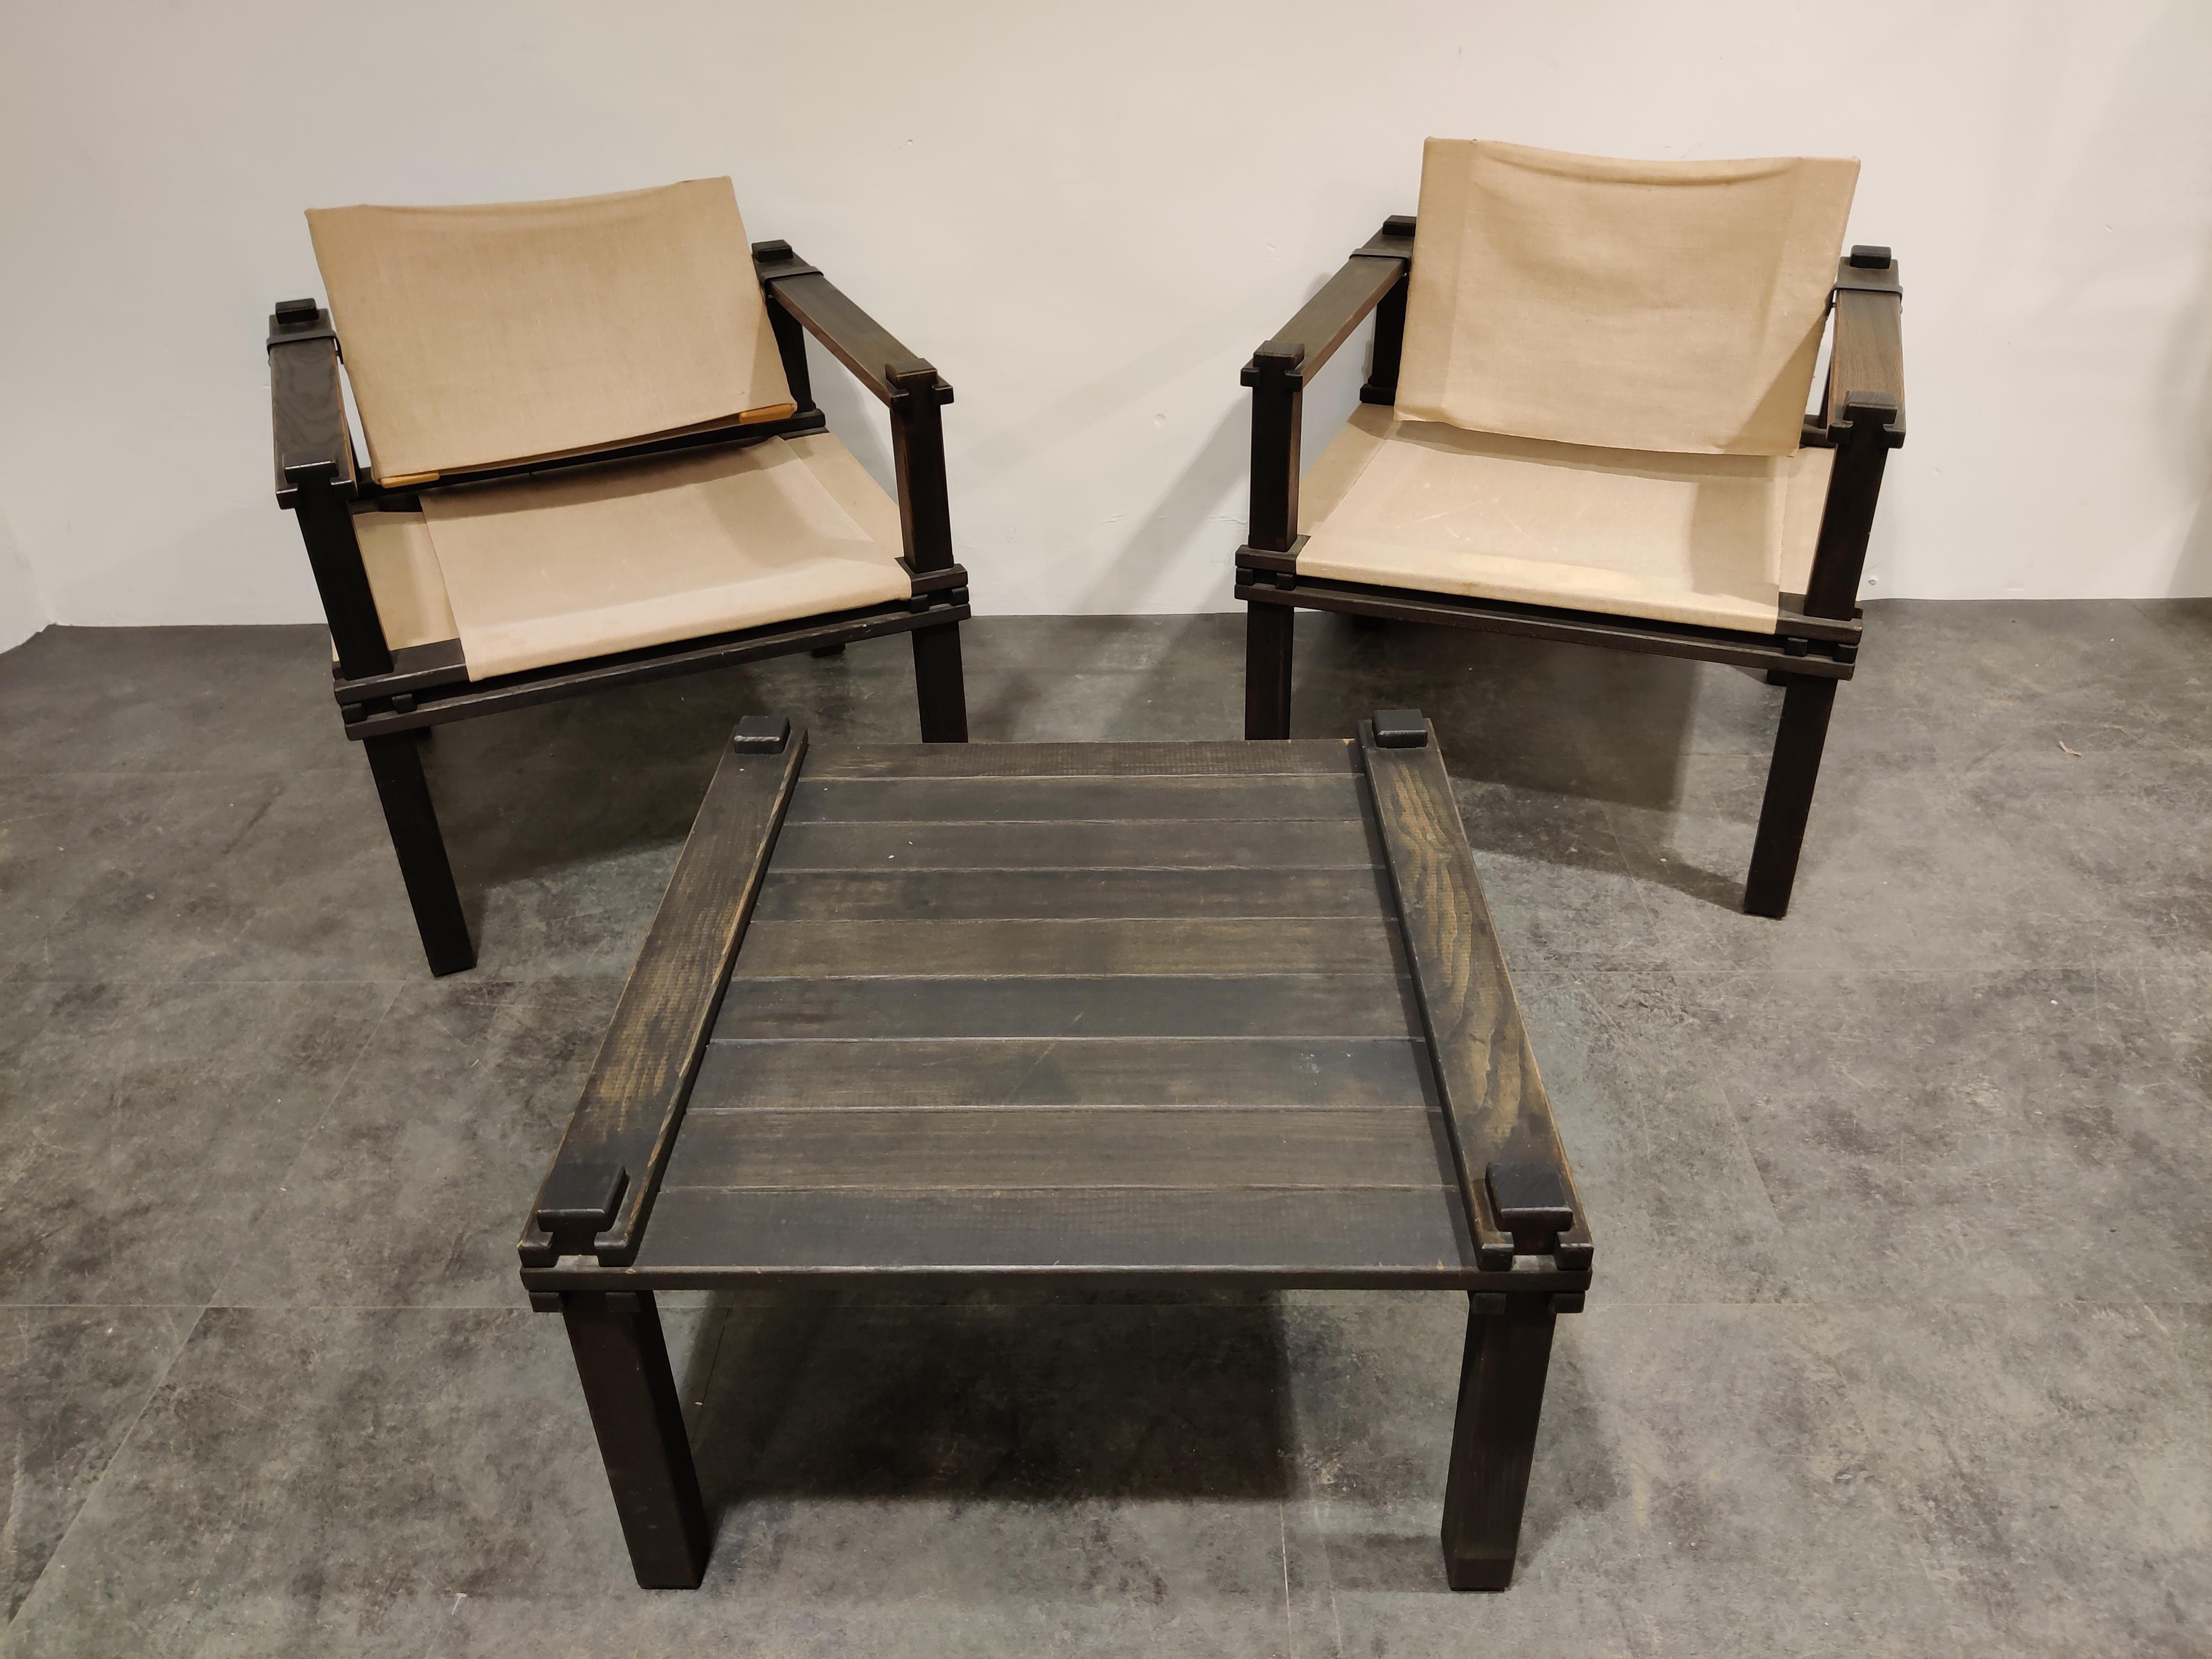 Rare set of armchairs with table designed by Gerd Lange for Bofinger.

Great interlocking structure with moveable backrest. Fun fact is that only two screws are used to assemble the complete chair.

Even better is that the chairs come with their